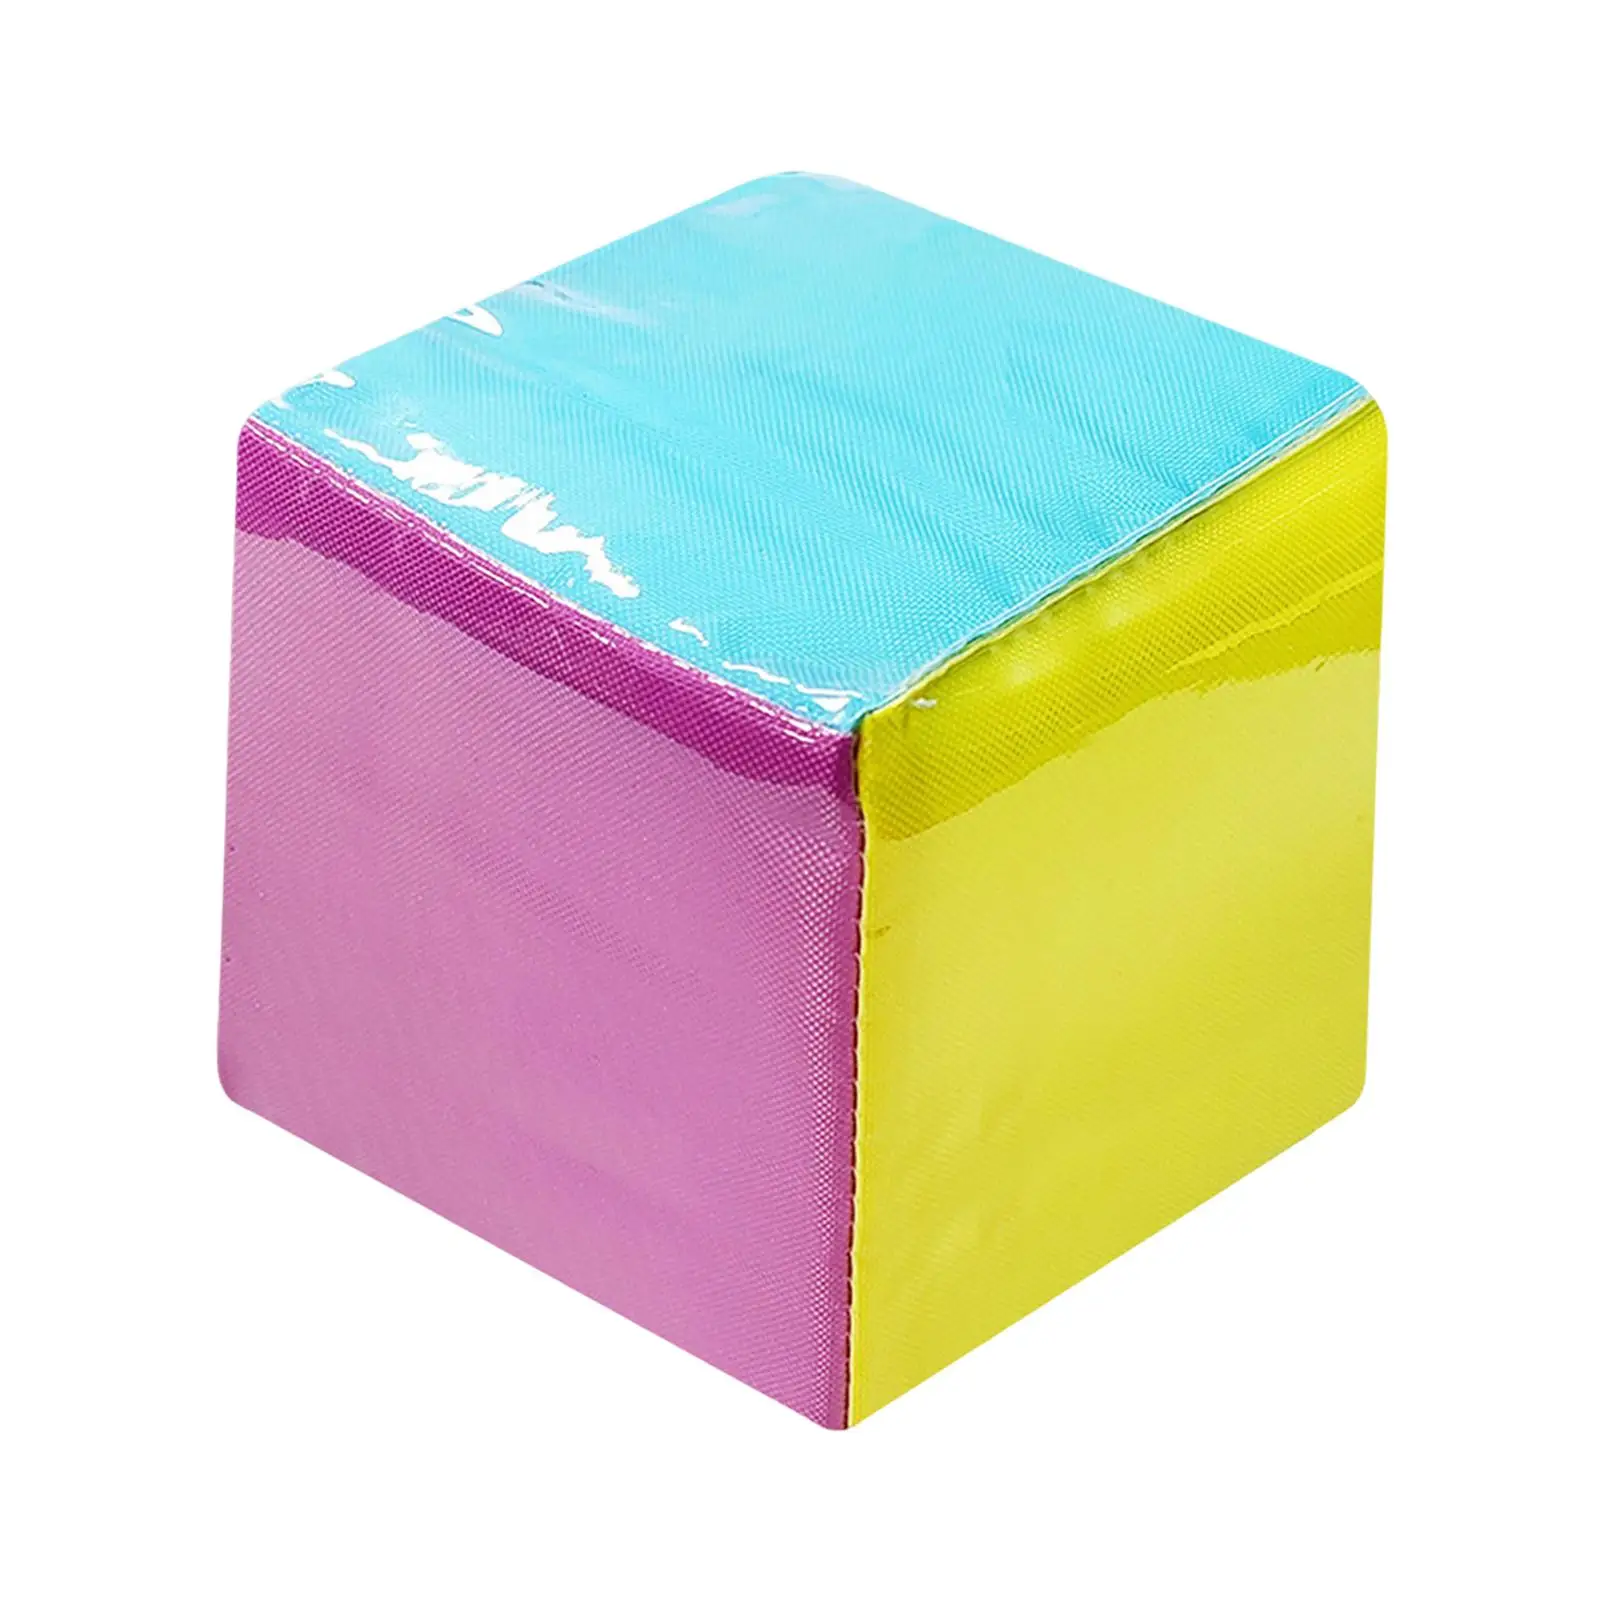 Early Education Learning Cubes Role Playing Education Playing Dice for Teaching Materials Kindergarten Blocks Toys Preschool